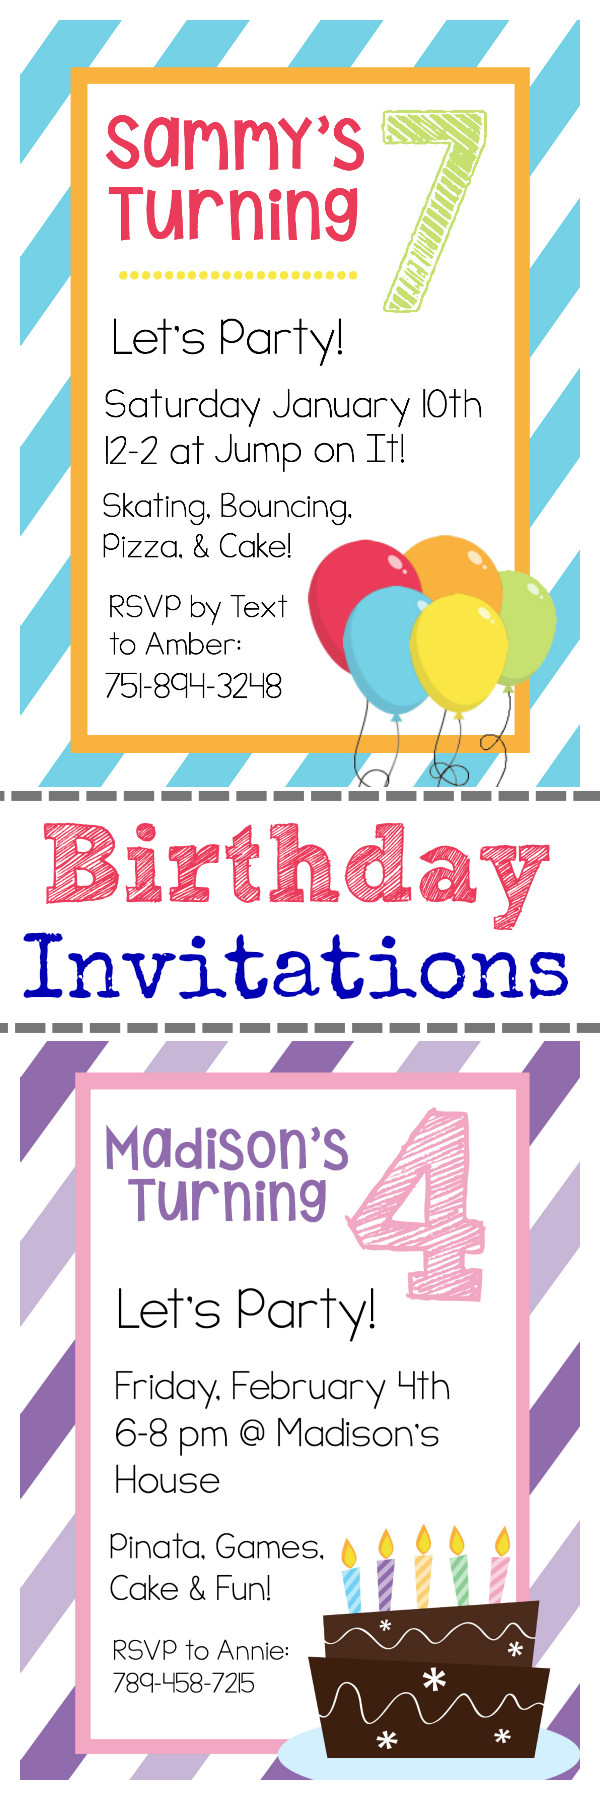 25 Best Free Evite Birthday Invitations Home, Family, Style and Art Ideas